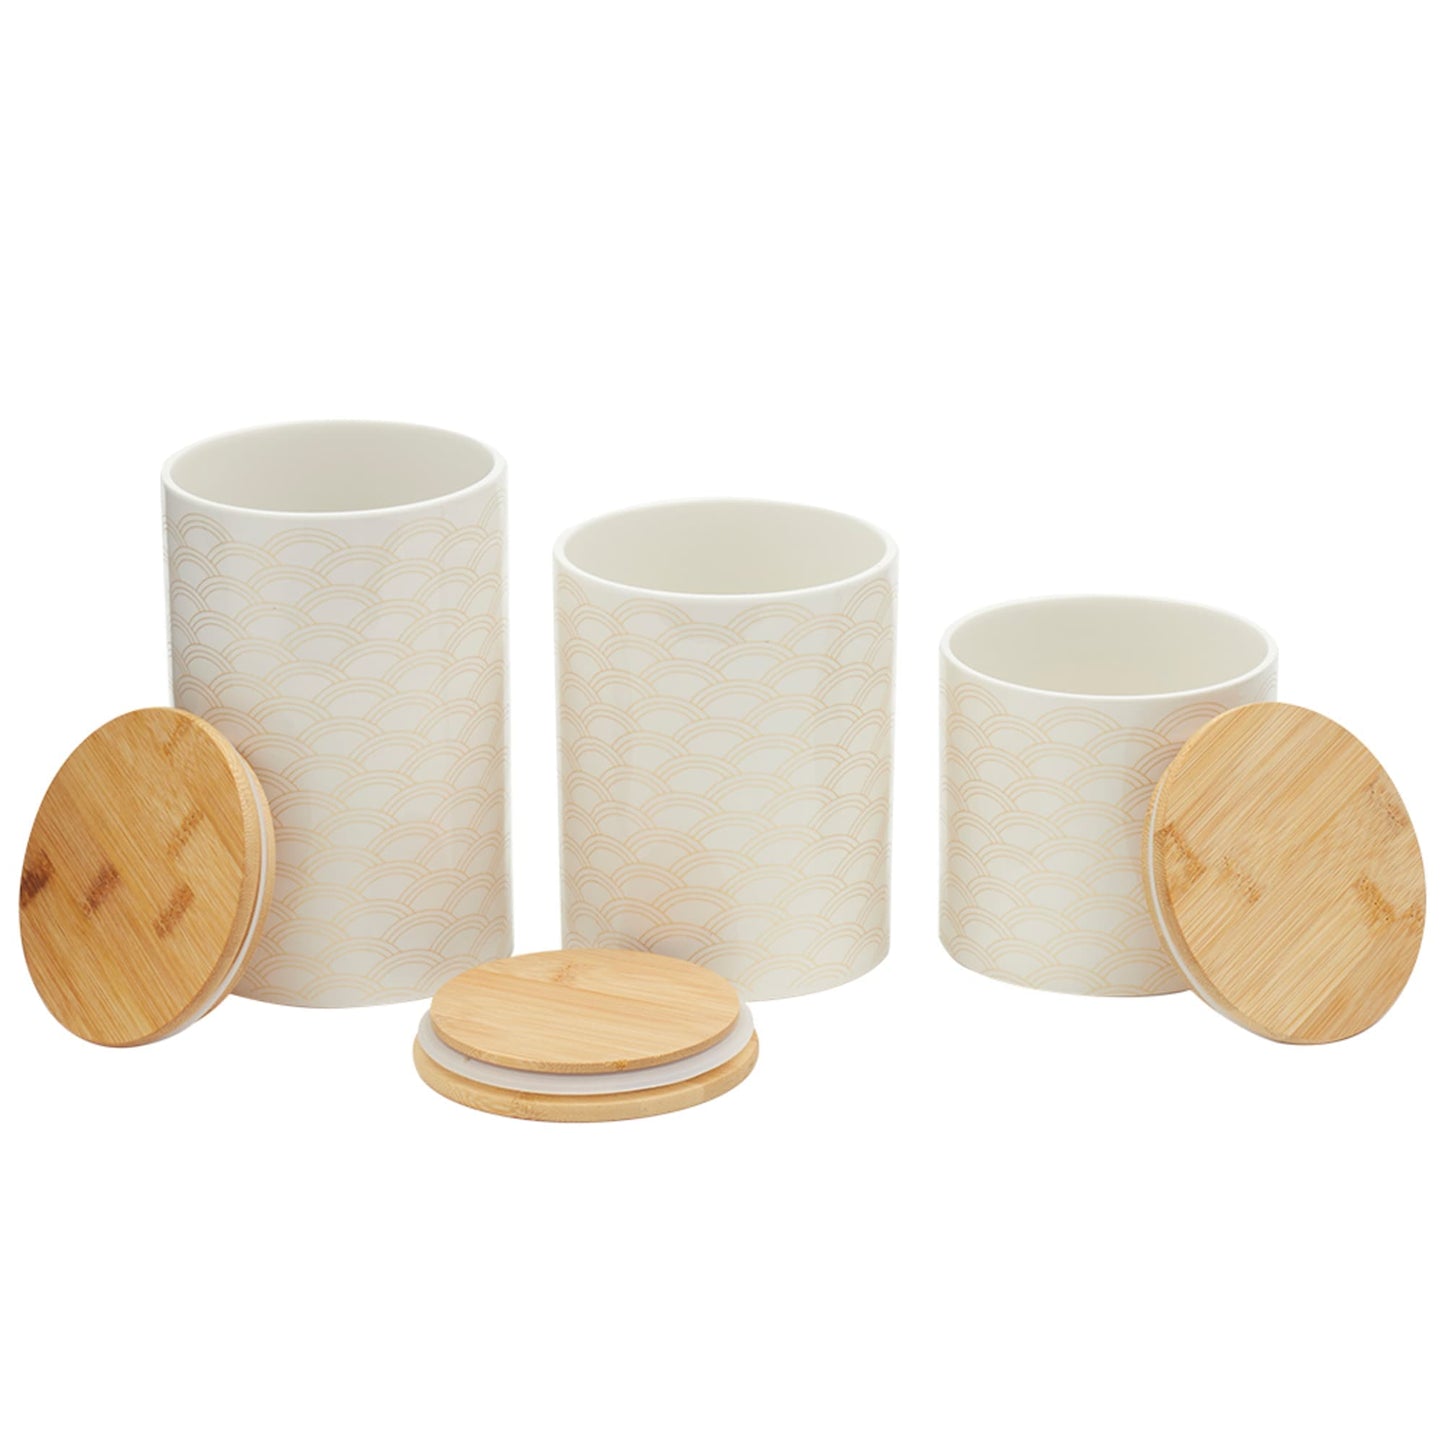 Scallop 3 Piece Ceramic Canister Set With Bamboo Tops, White